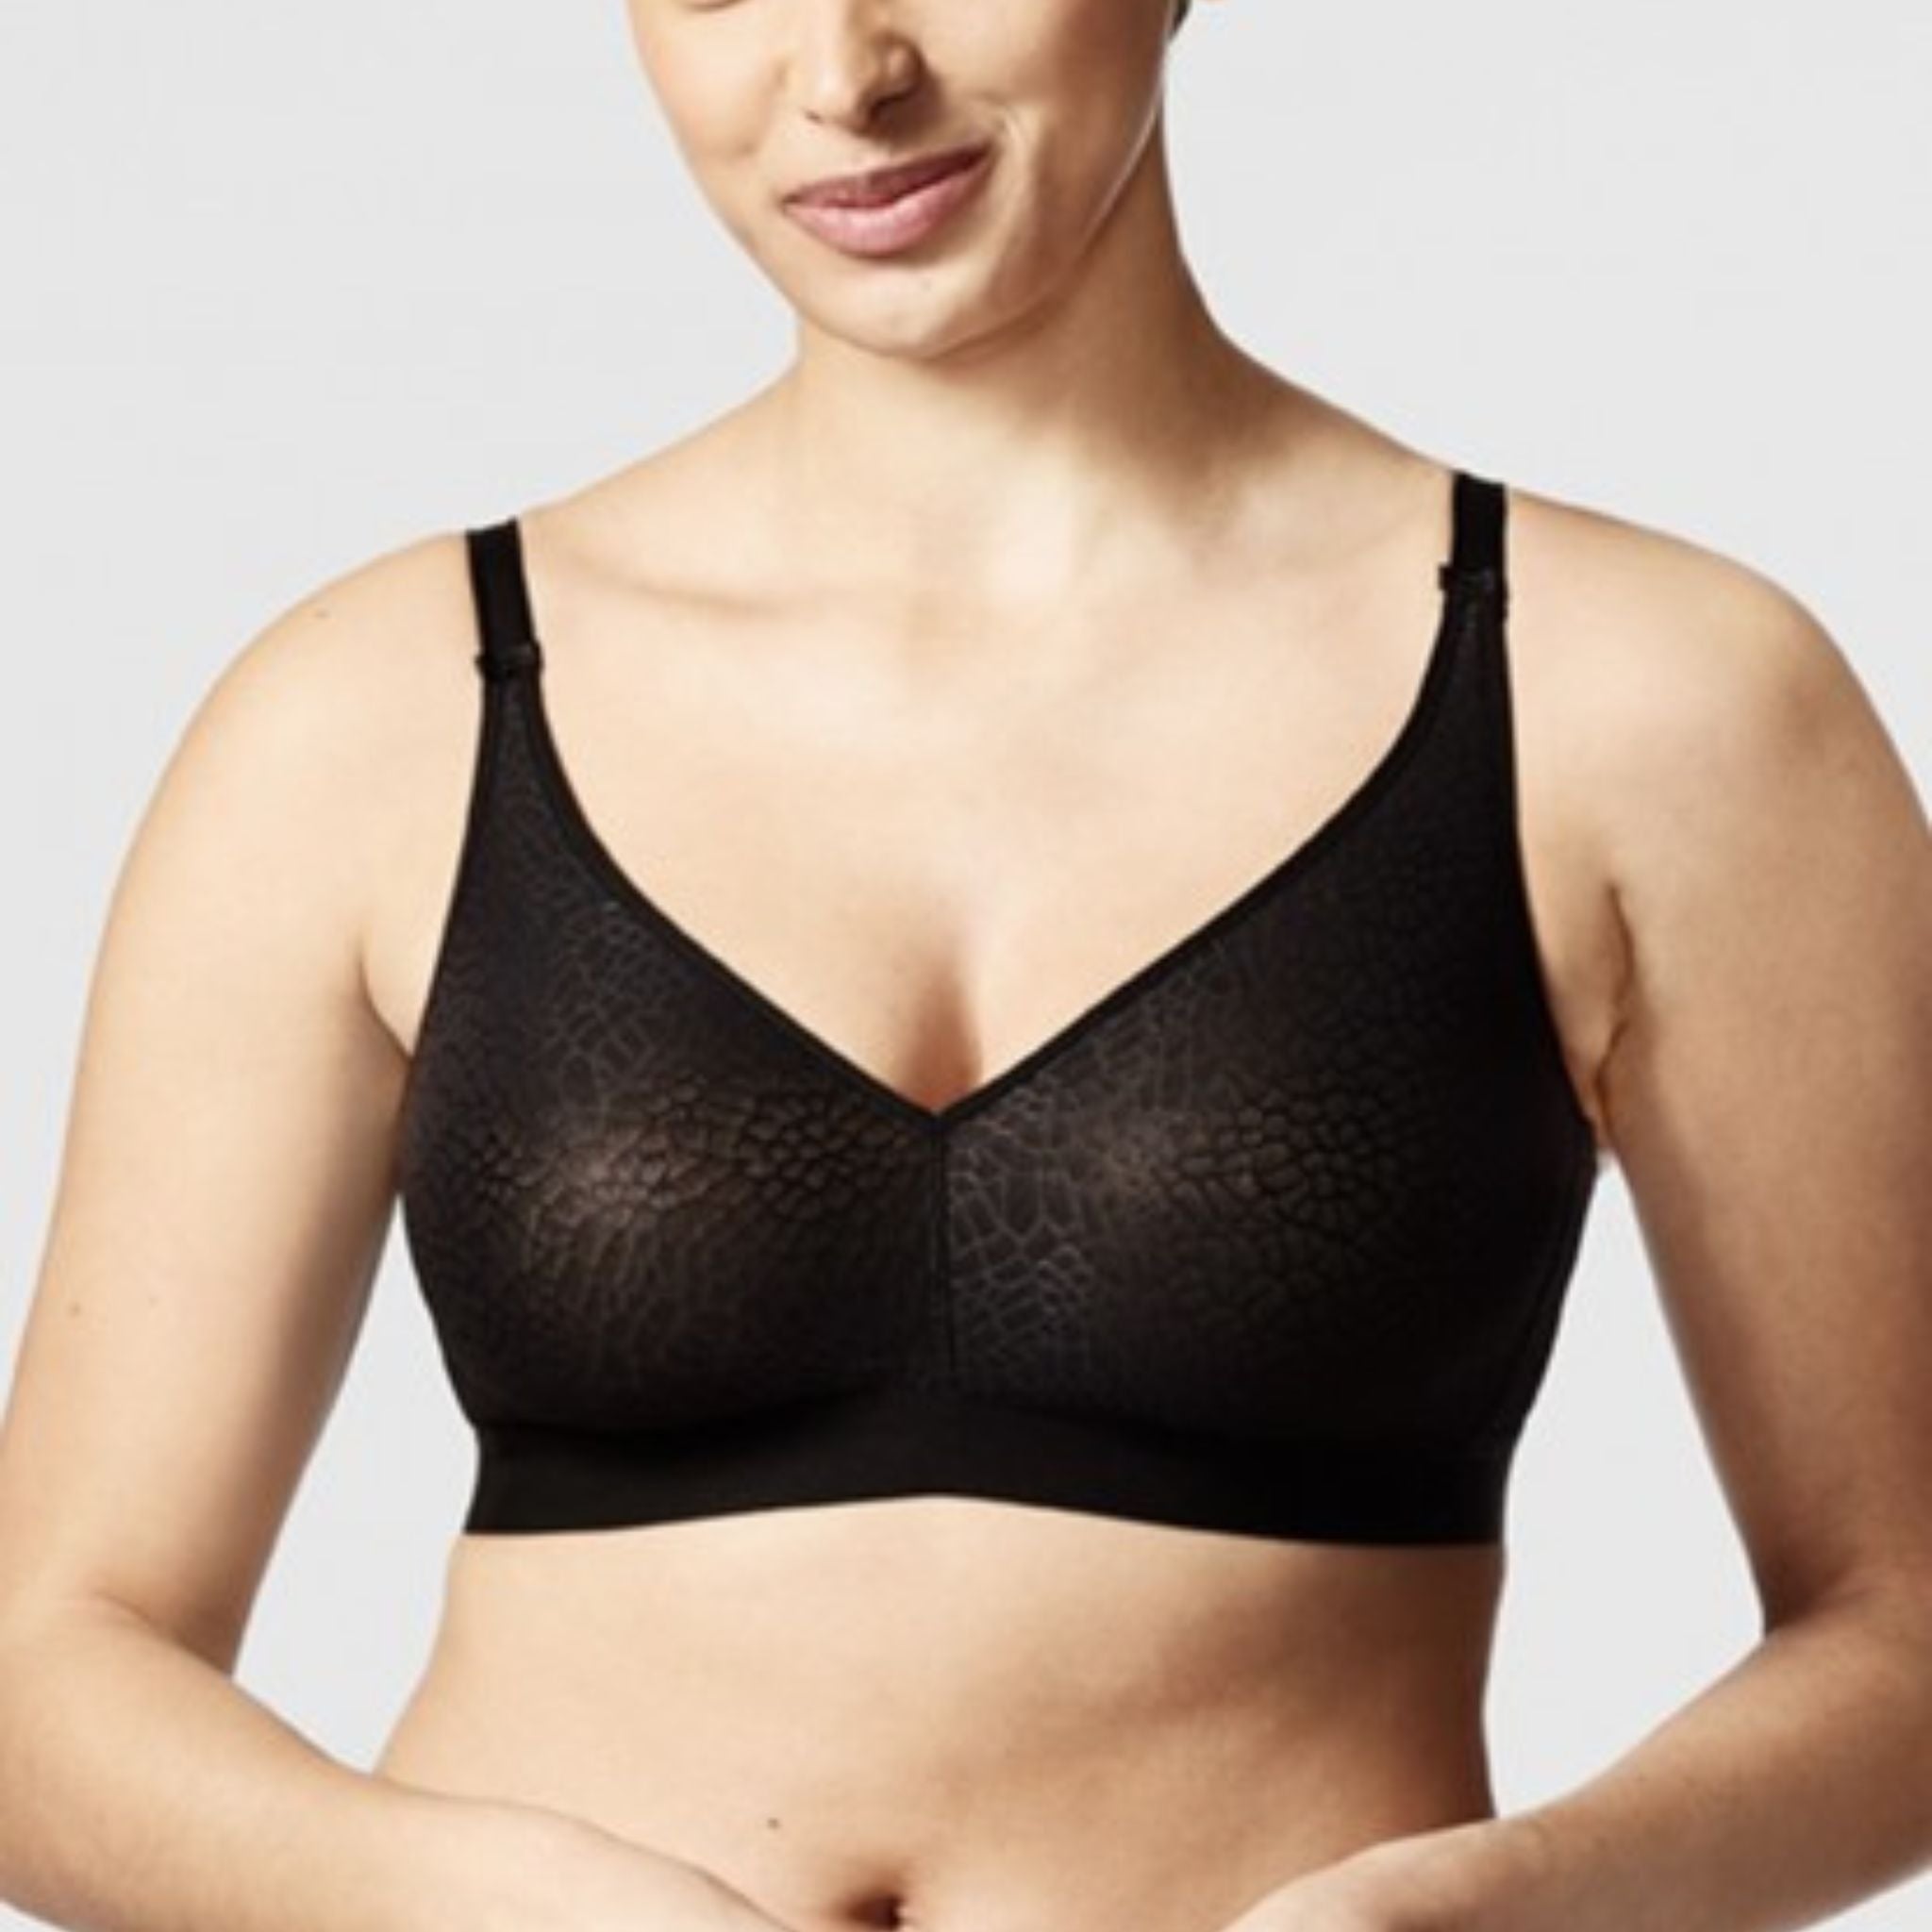 Chantelle's favorite seamless minimizer now in wireless form. This bralette comfortably lifts busts with the famous floral pattern showcasing a matte/shine contrast and minimizing qualities.